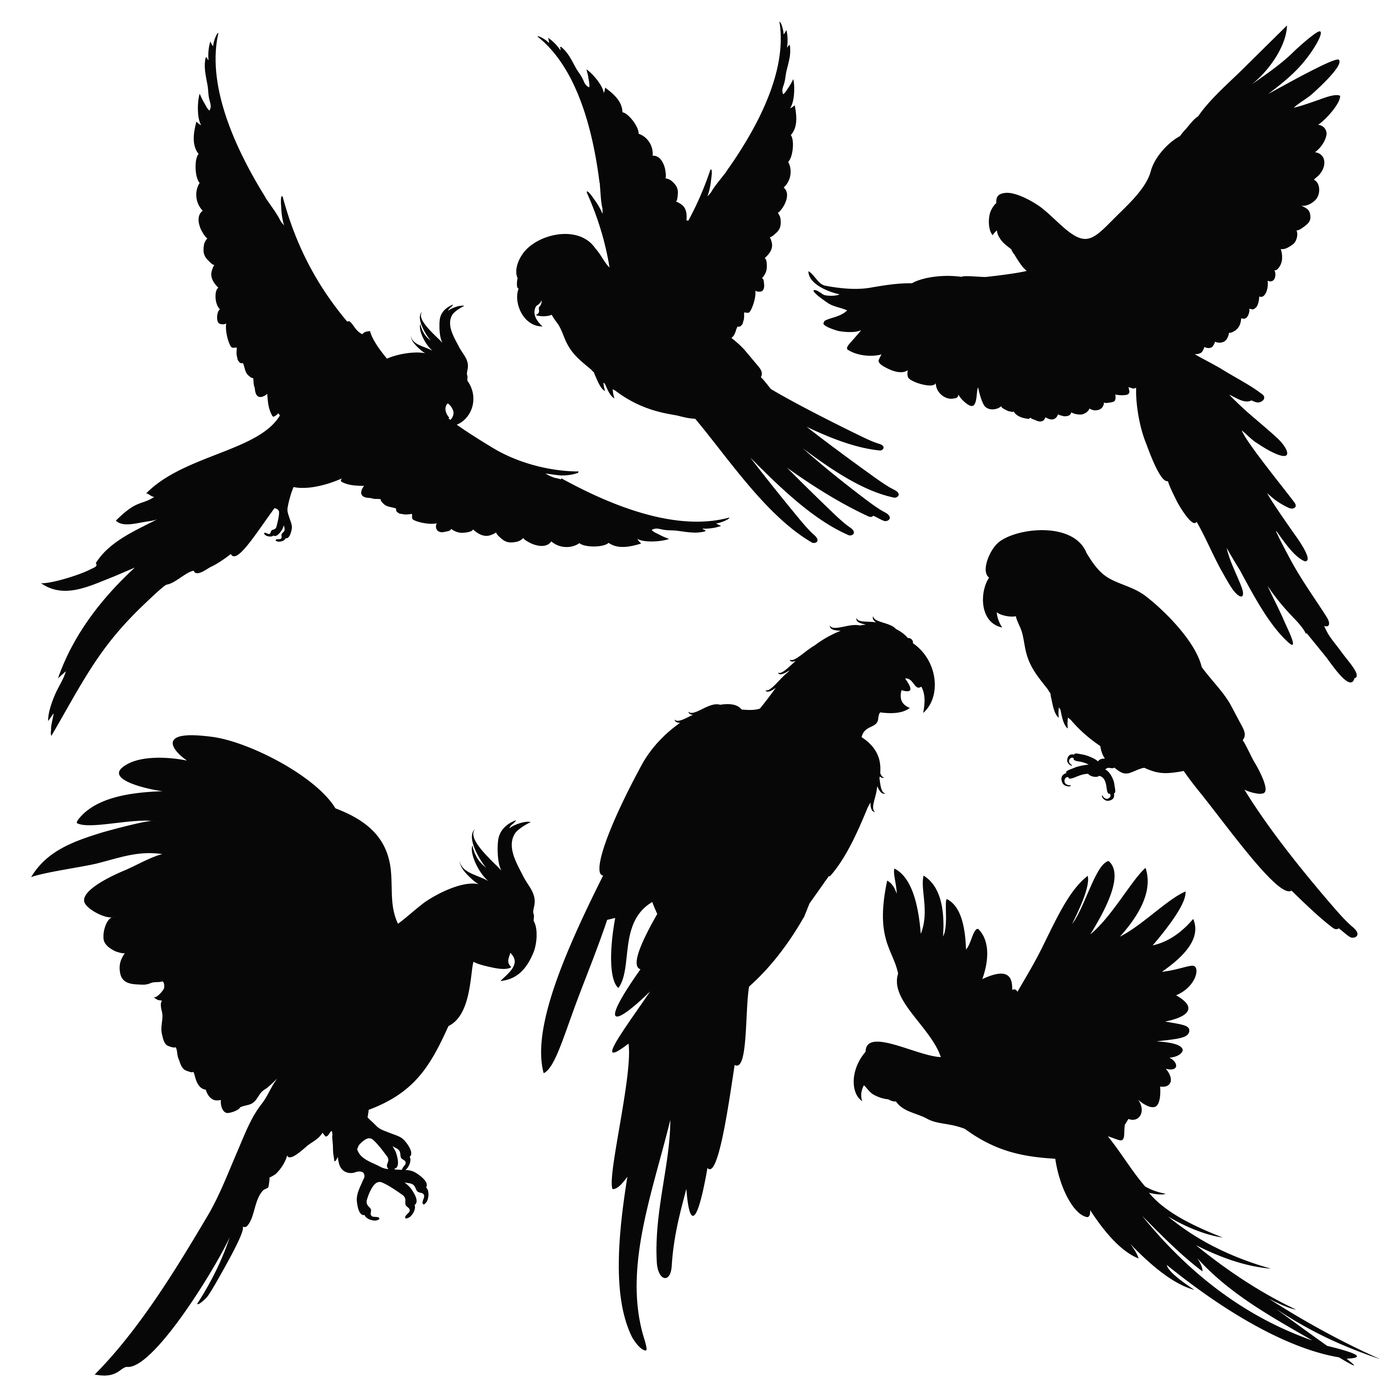 Vector Parrots Amazon Jungle Birds Silhouettes Isolated On White By Microvector Thehungryjpeg Com